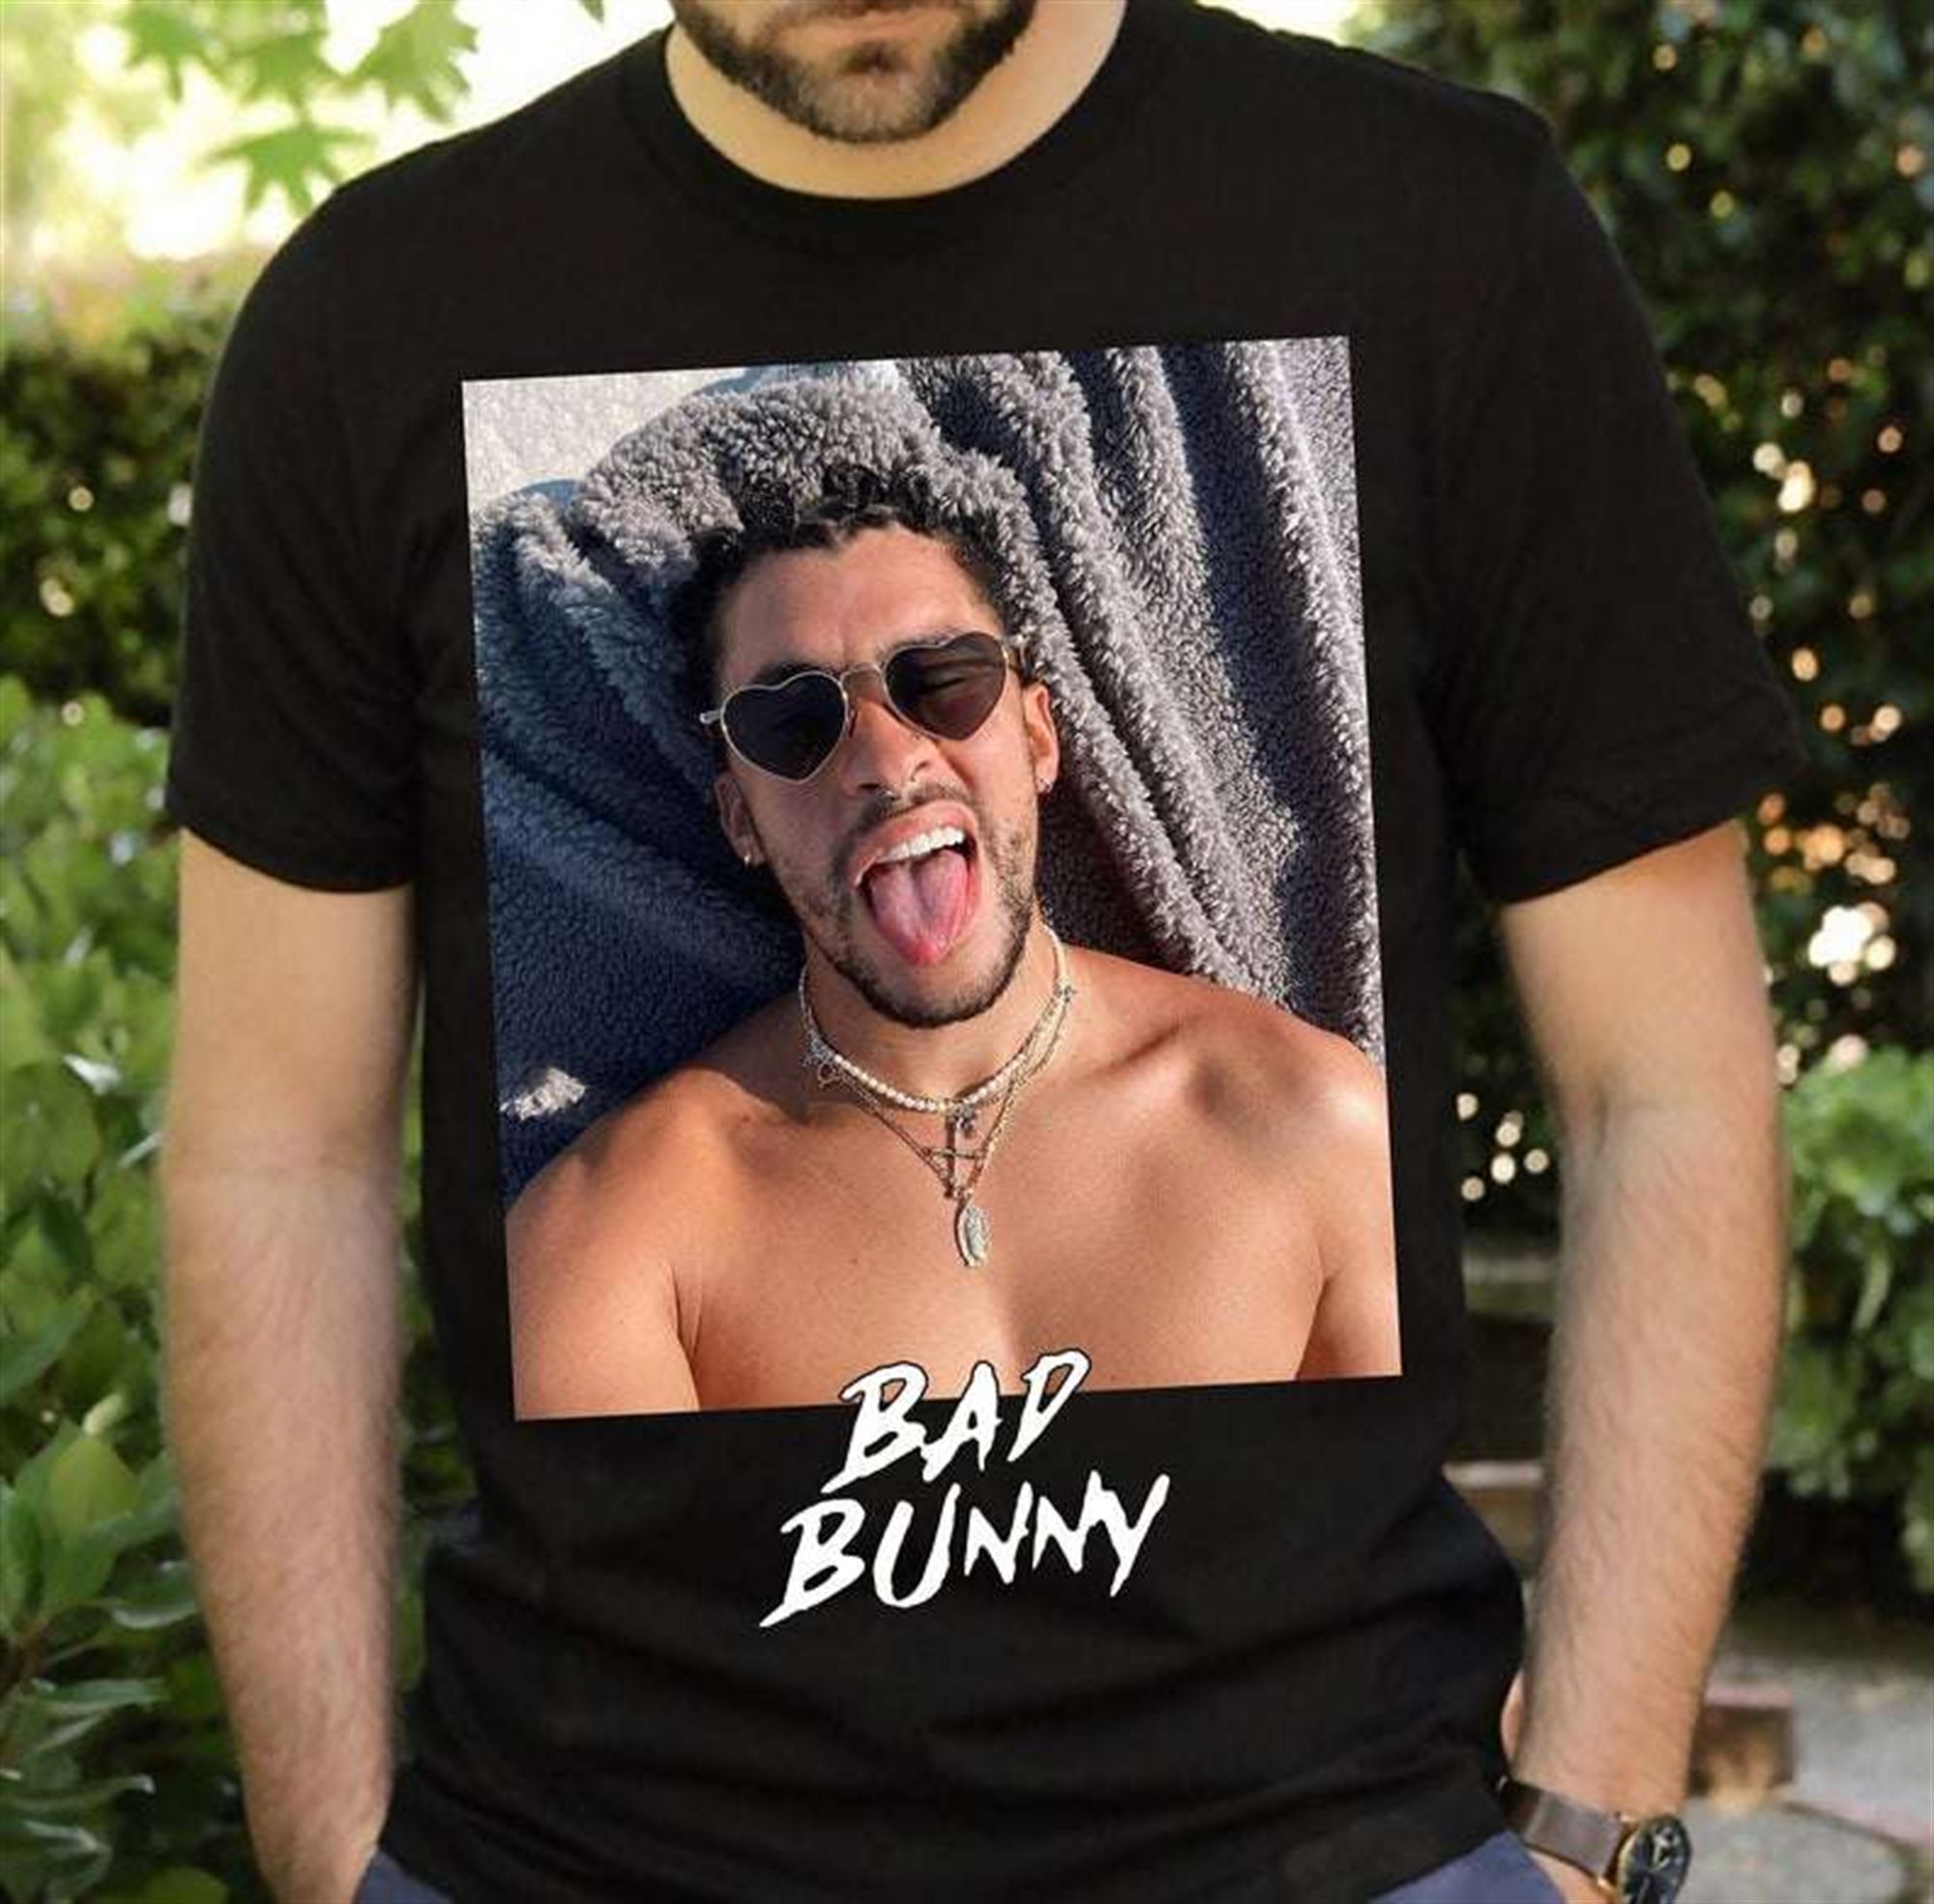 Bad Bunny Vintage Classic Unisex T Shirt Size Up To 5xl